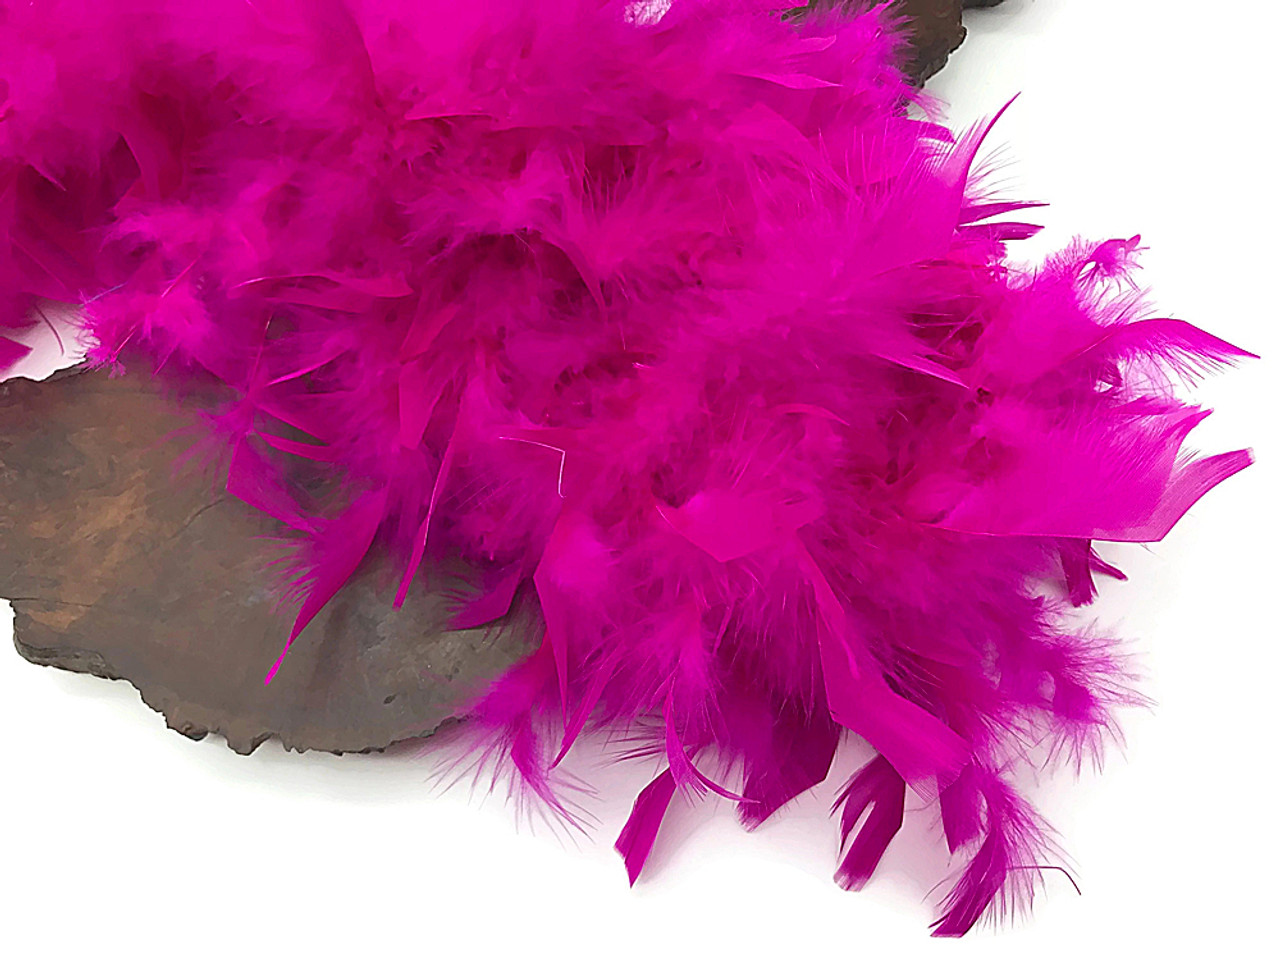 65 Grams Baby Pink With Hot Pink Tips Chandelle Feather Boa